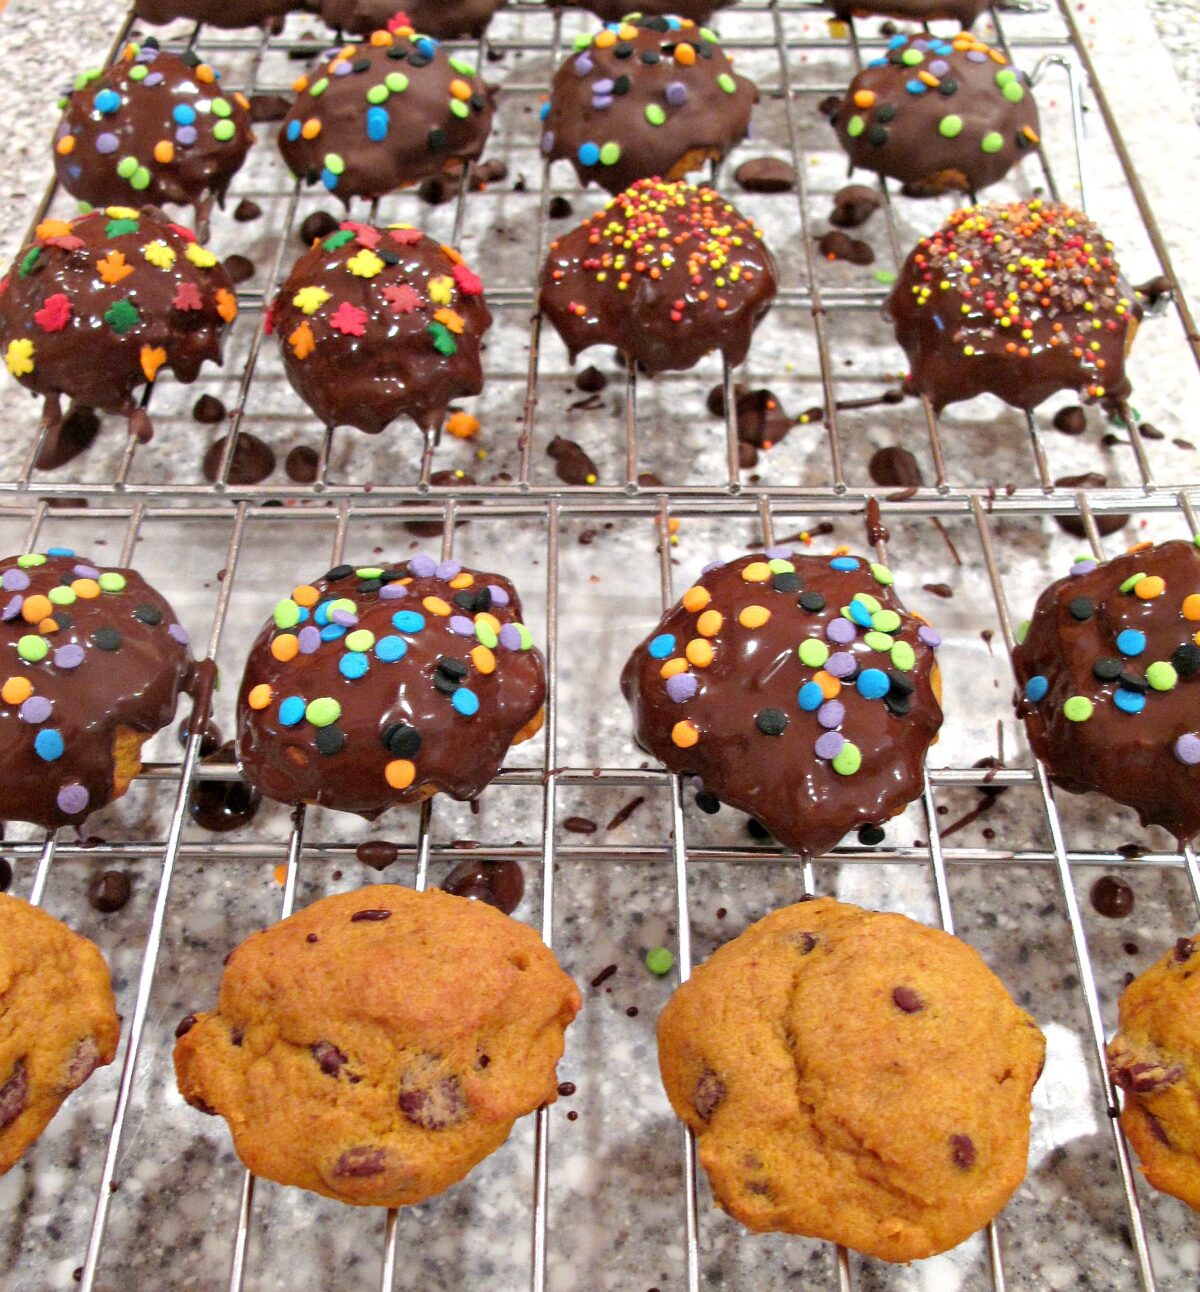 Cookies on a wire rack after chocolate coating and sprinkles are applied.